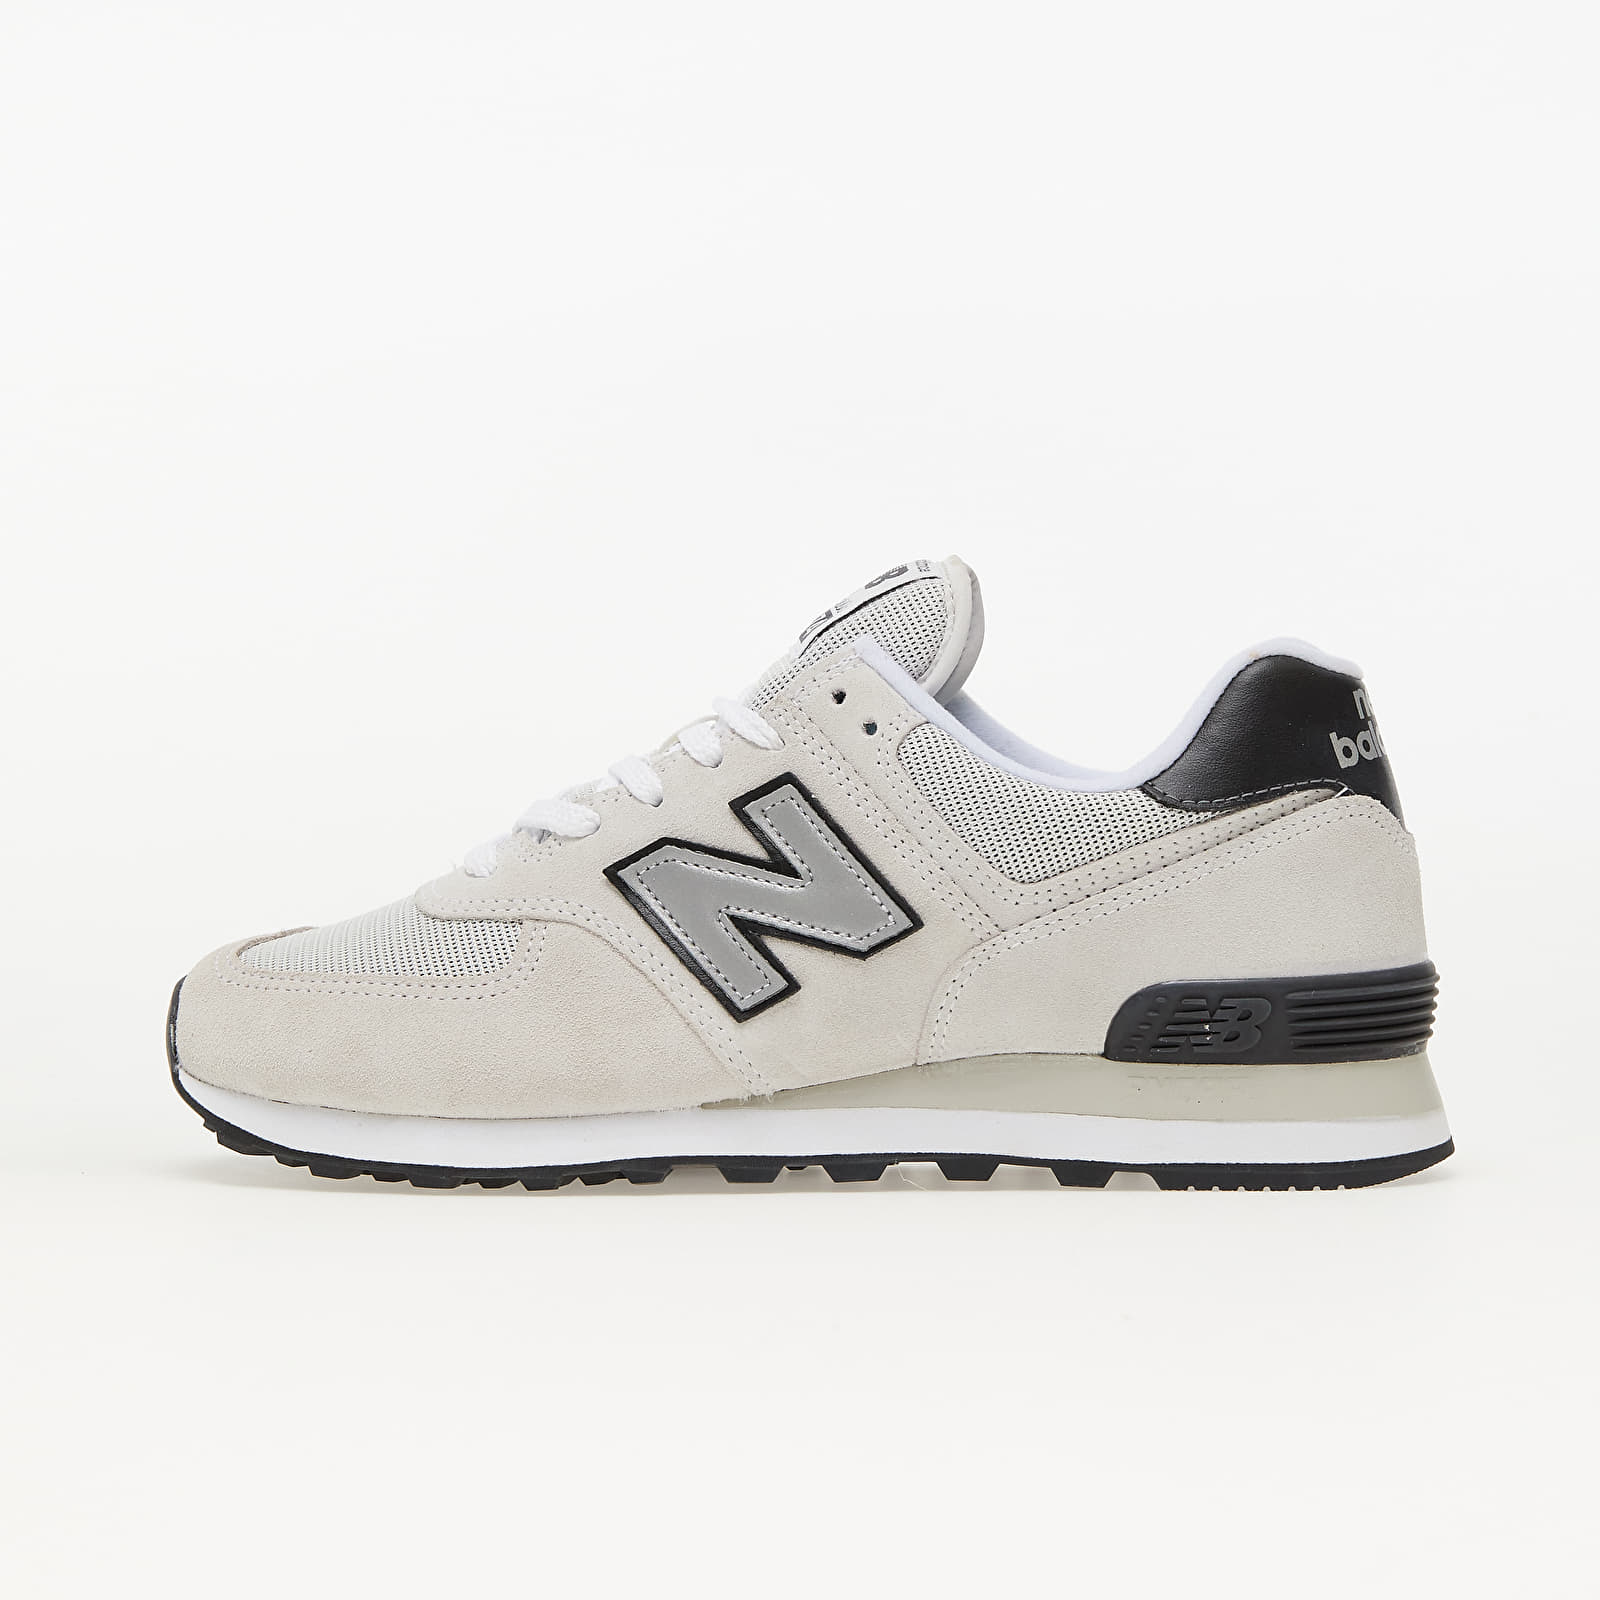 Chaussures et baskets homme New Balance 574 Gray